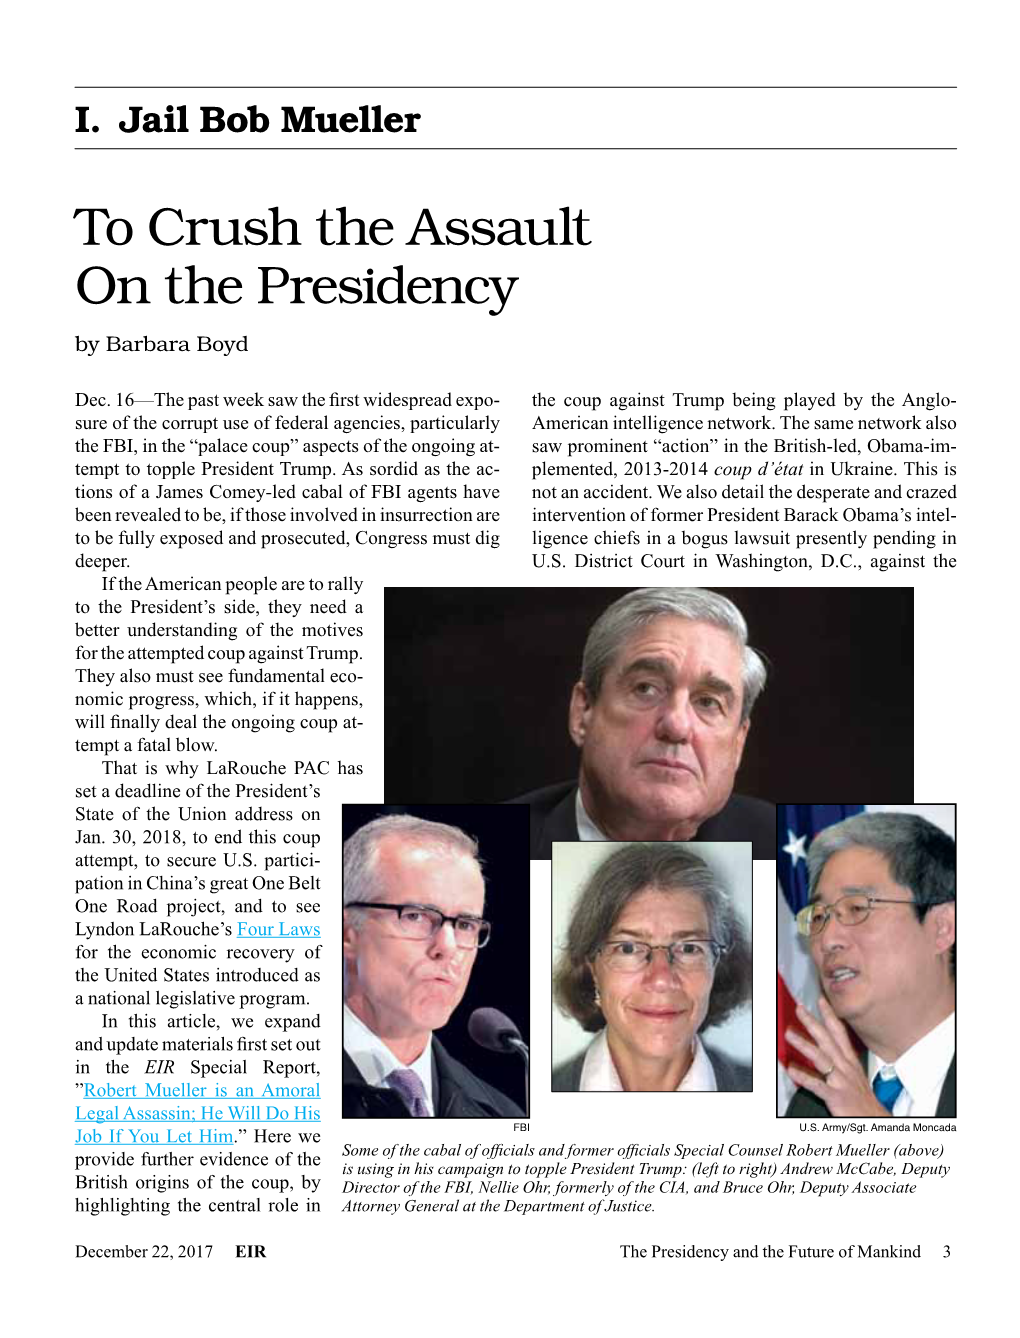 To Crush the Assault on the Presidency by Barbara Boyd